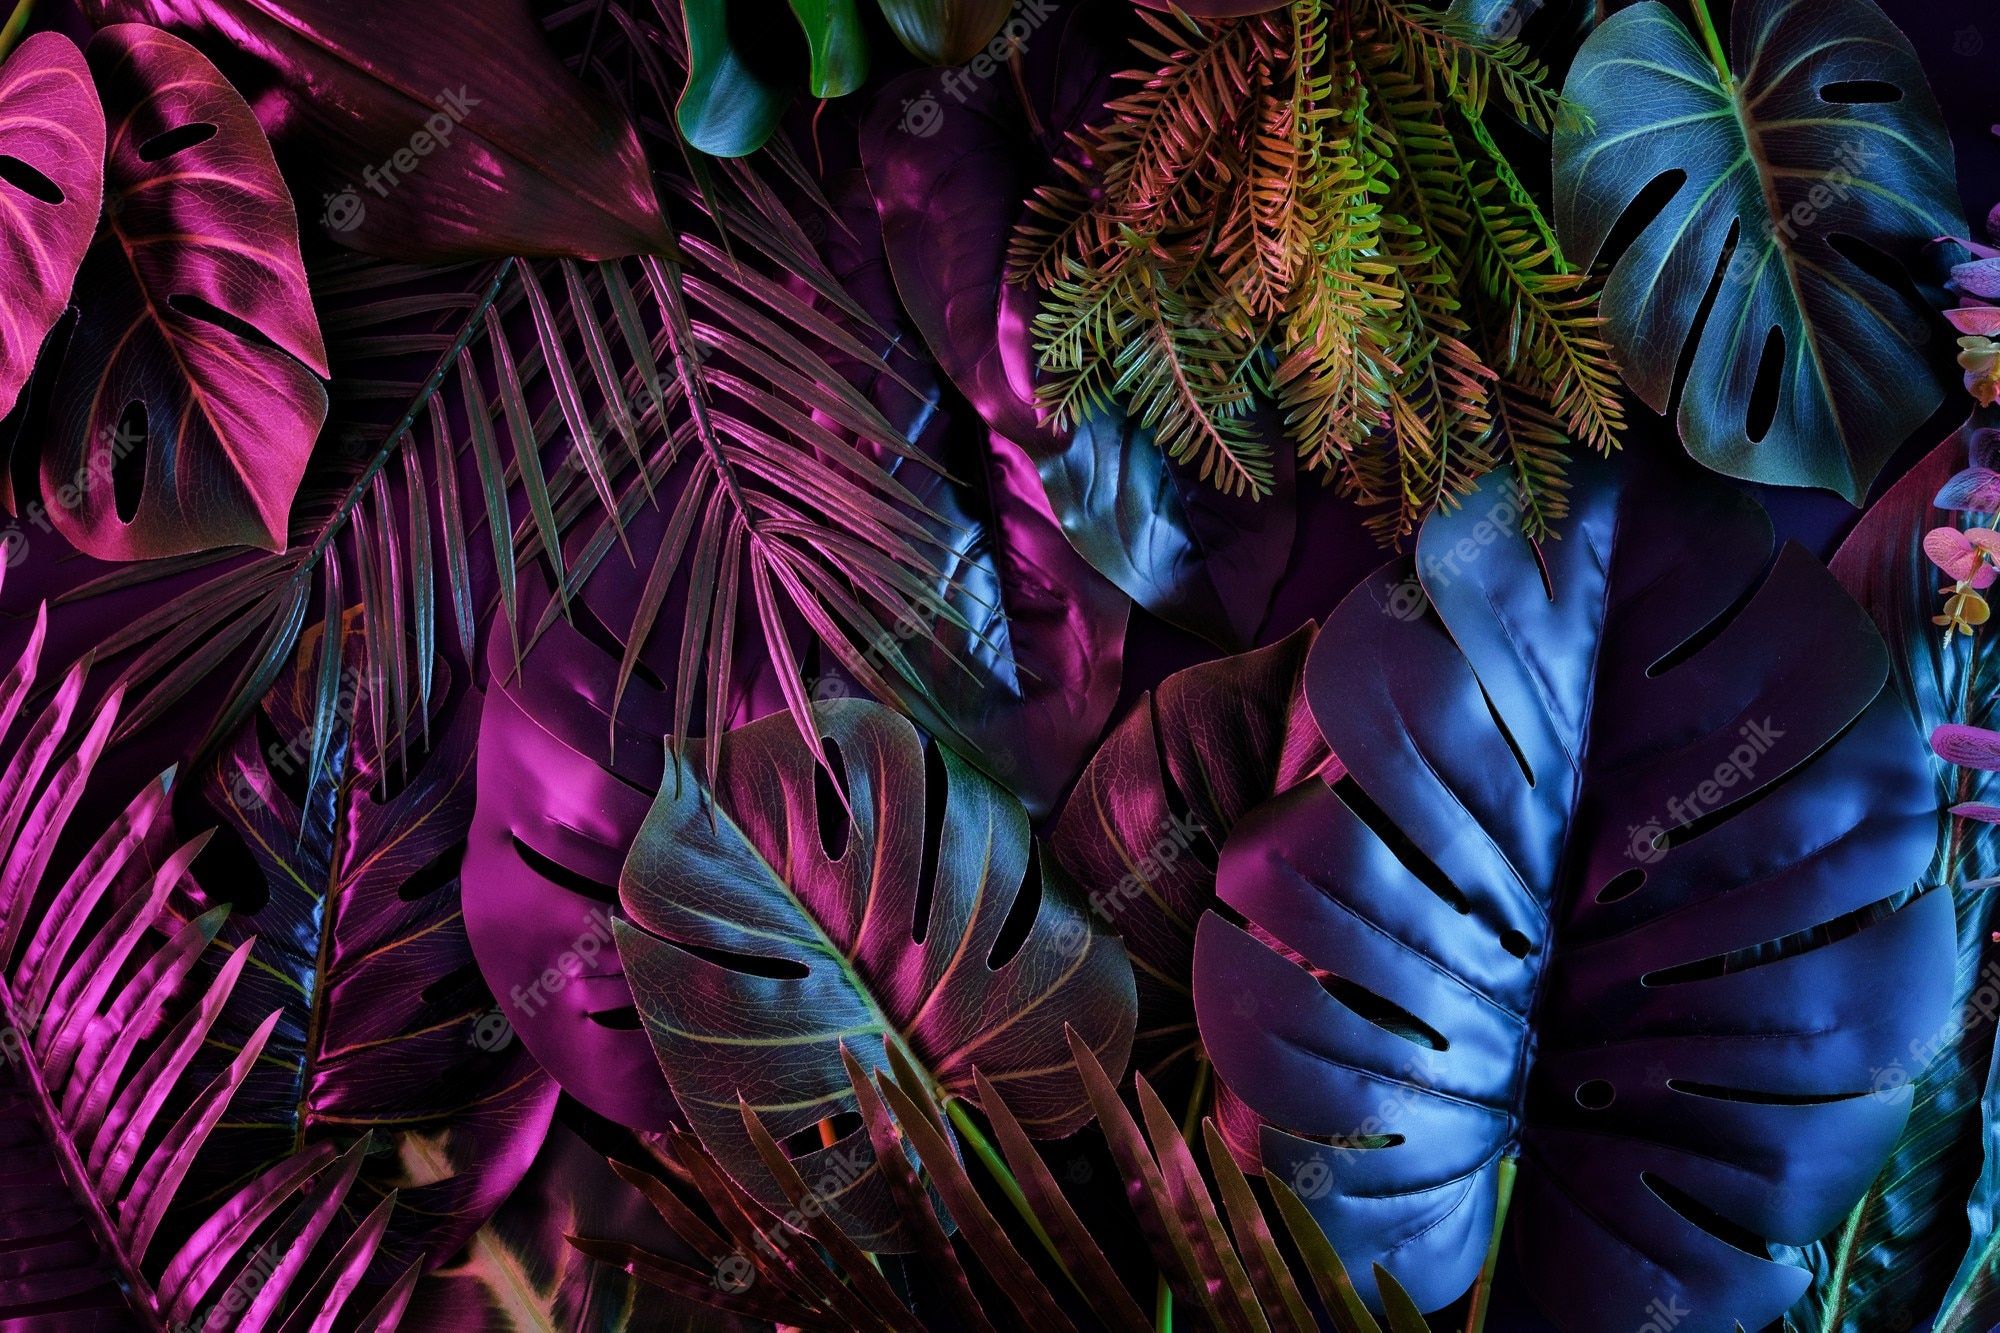 A colorful background of tropical plants - Neon, jungle